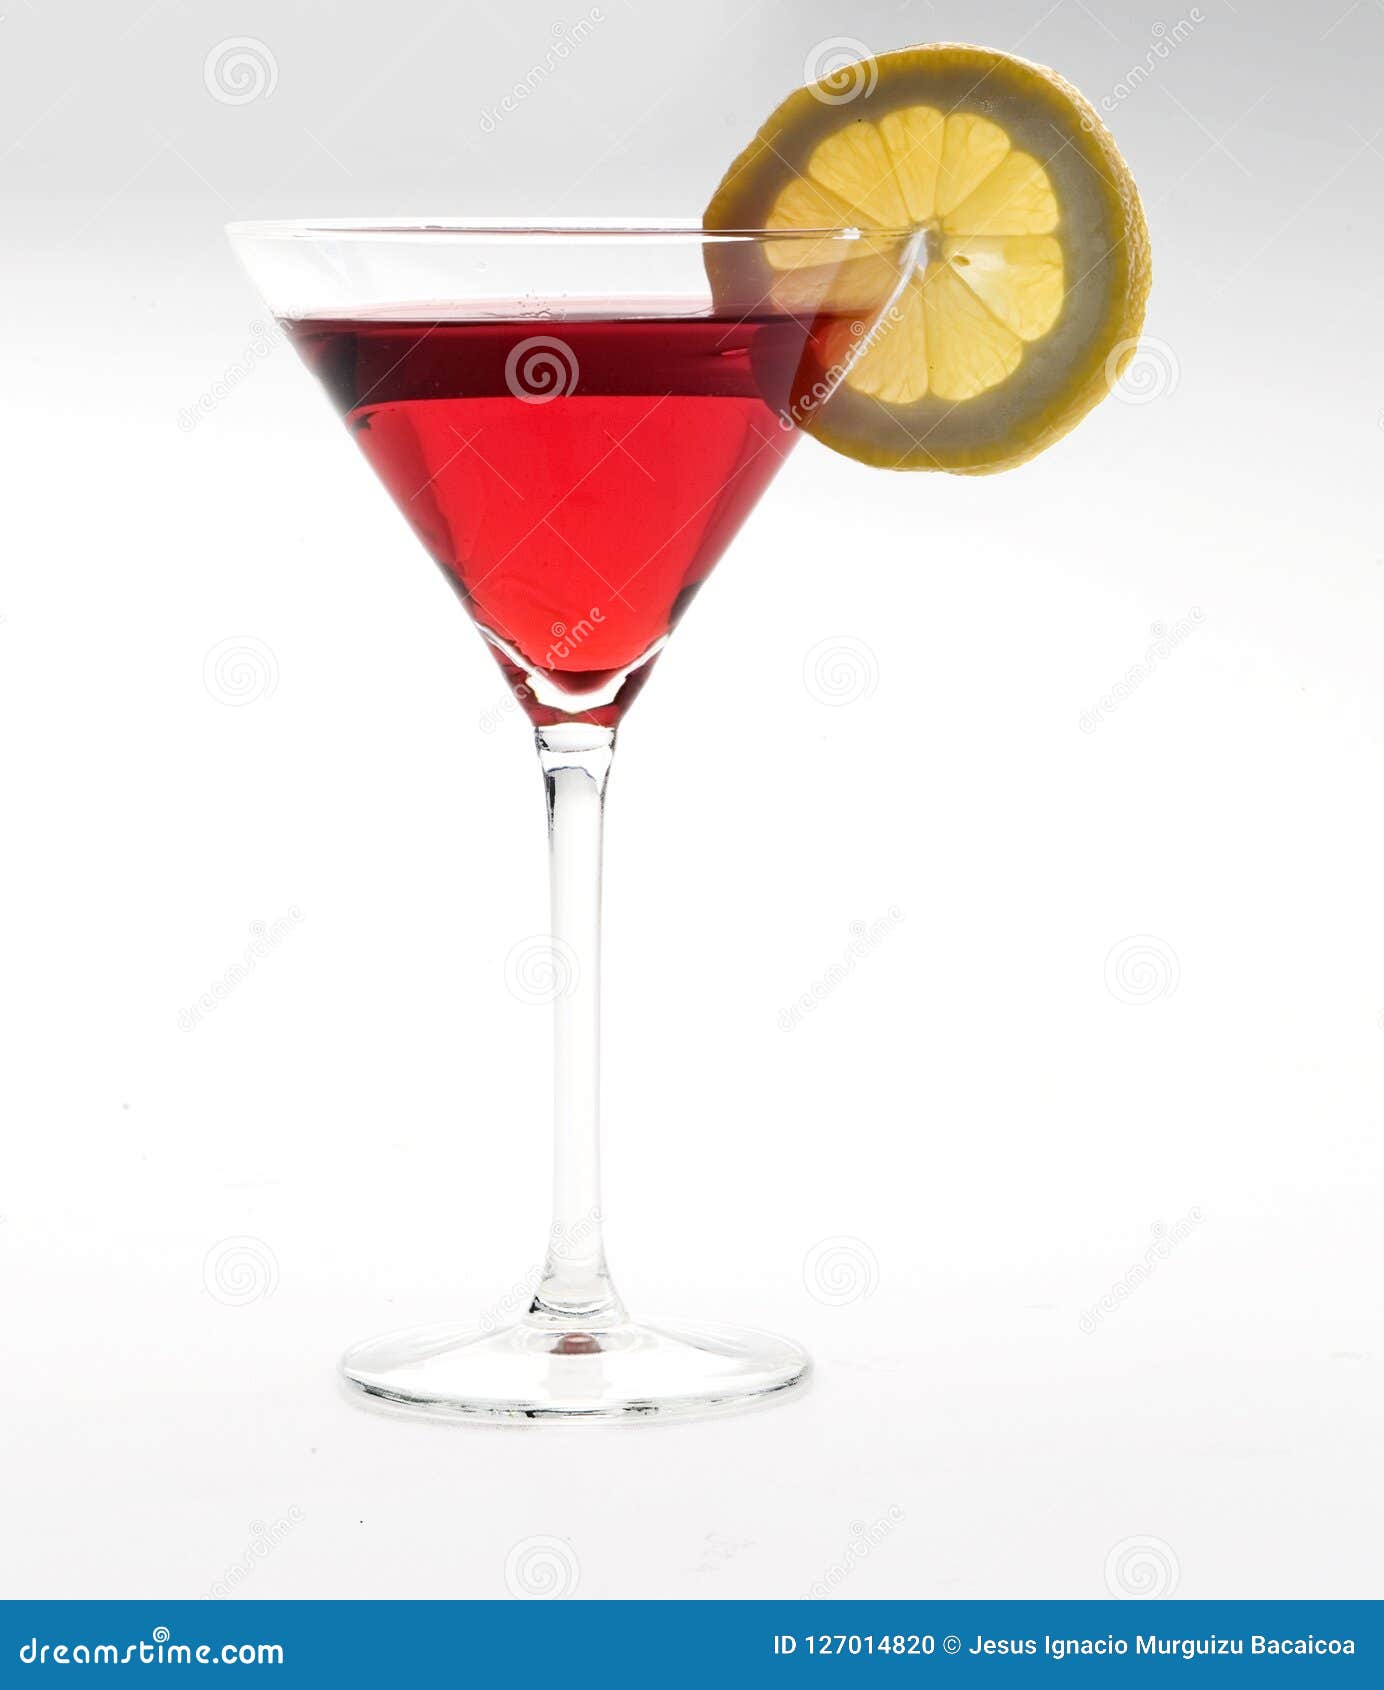 glass cup for snacks with martini inside and decorated with a slice of lemon